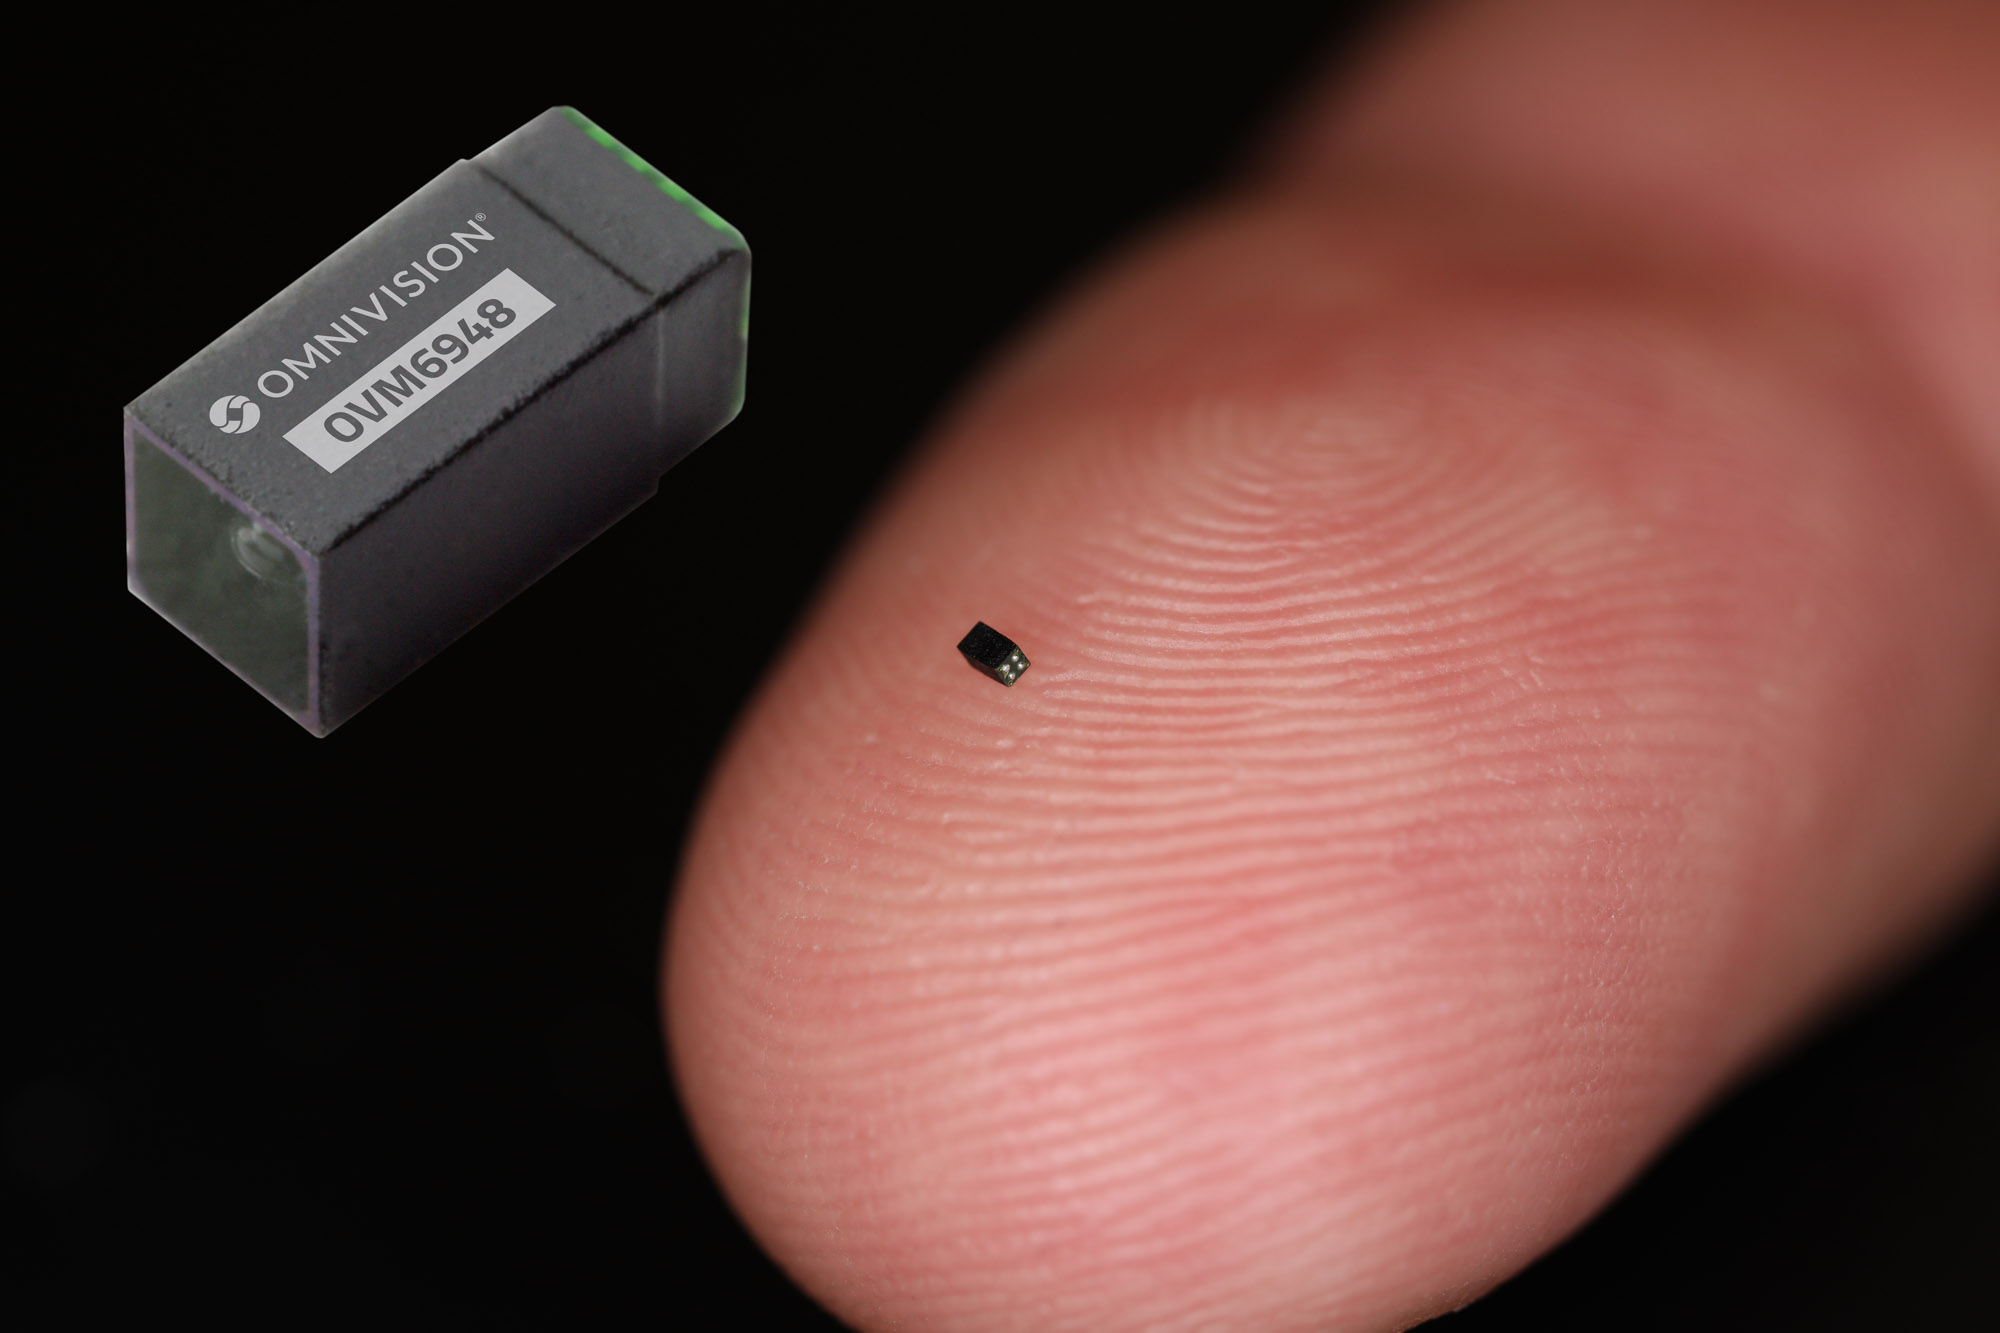 OMNIVISION Announces Guinness World Record for Smallest Image Sensor and  New Miniature Camera Module for Disposable Medical Applications